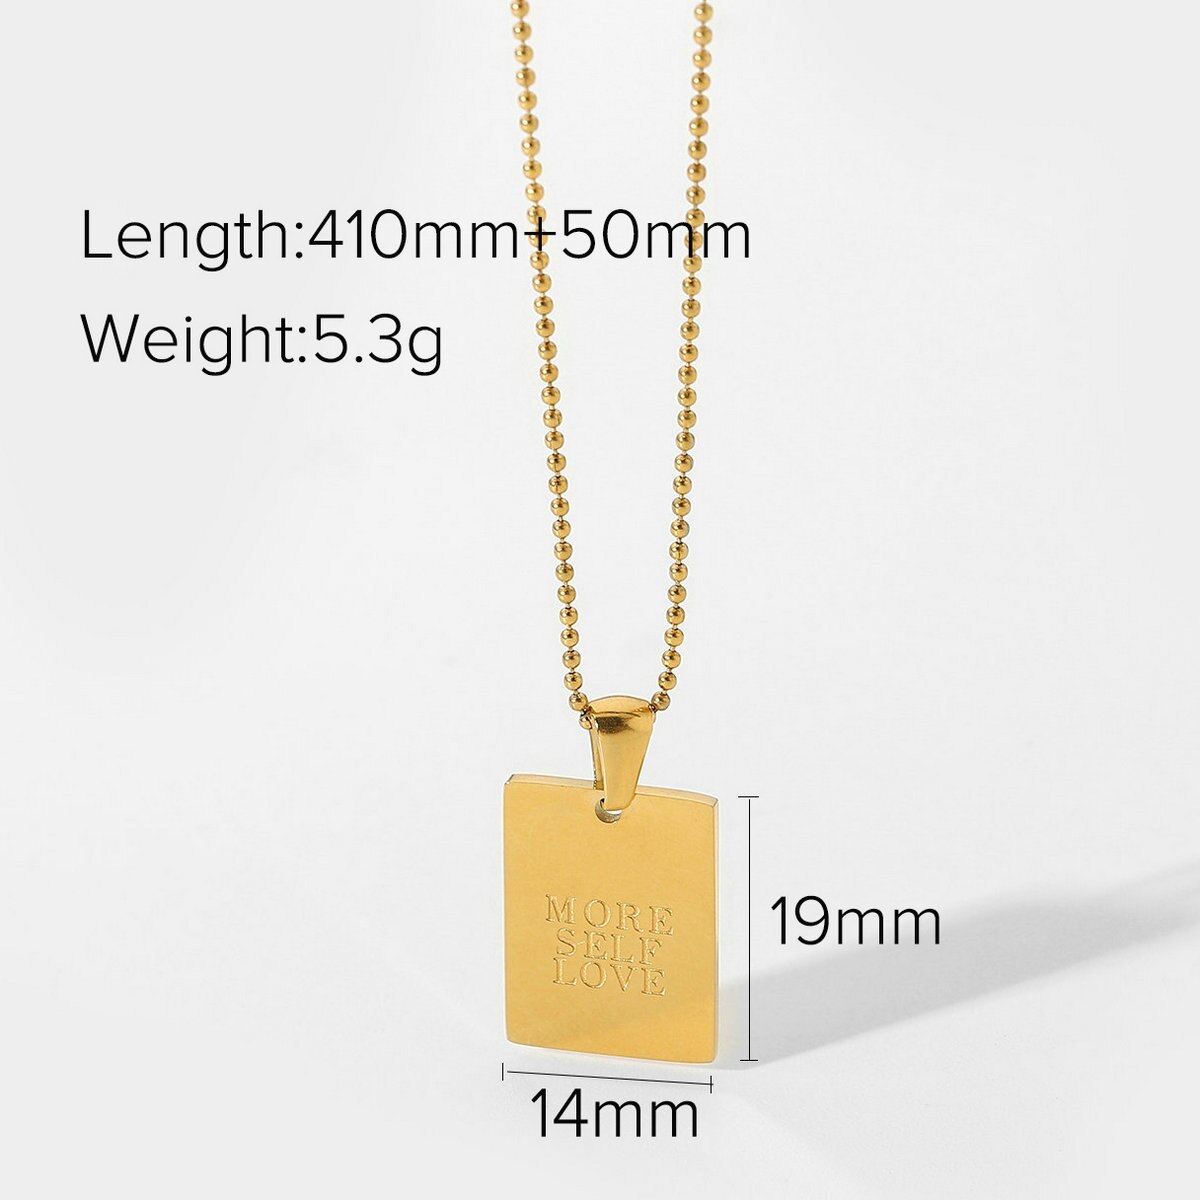 Stainless Steel Inspirational Necklace Gold Plated Engraved Square Dainty Pendant Letters Chain Necklace Jewelry